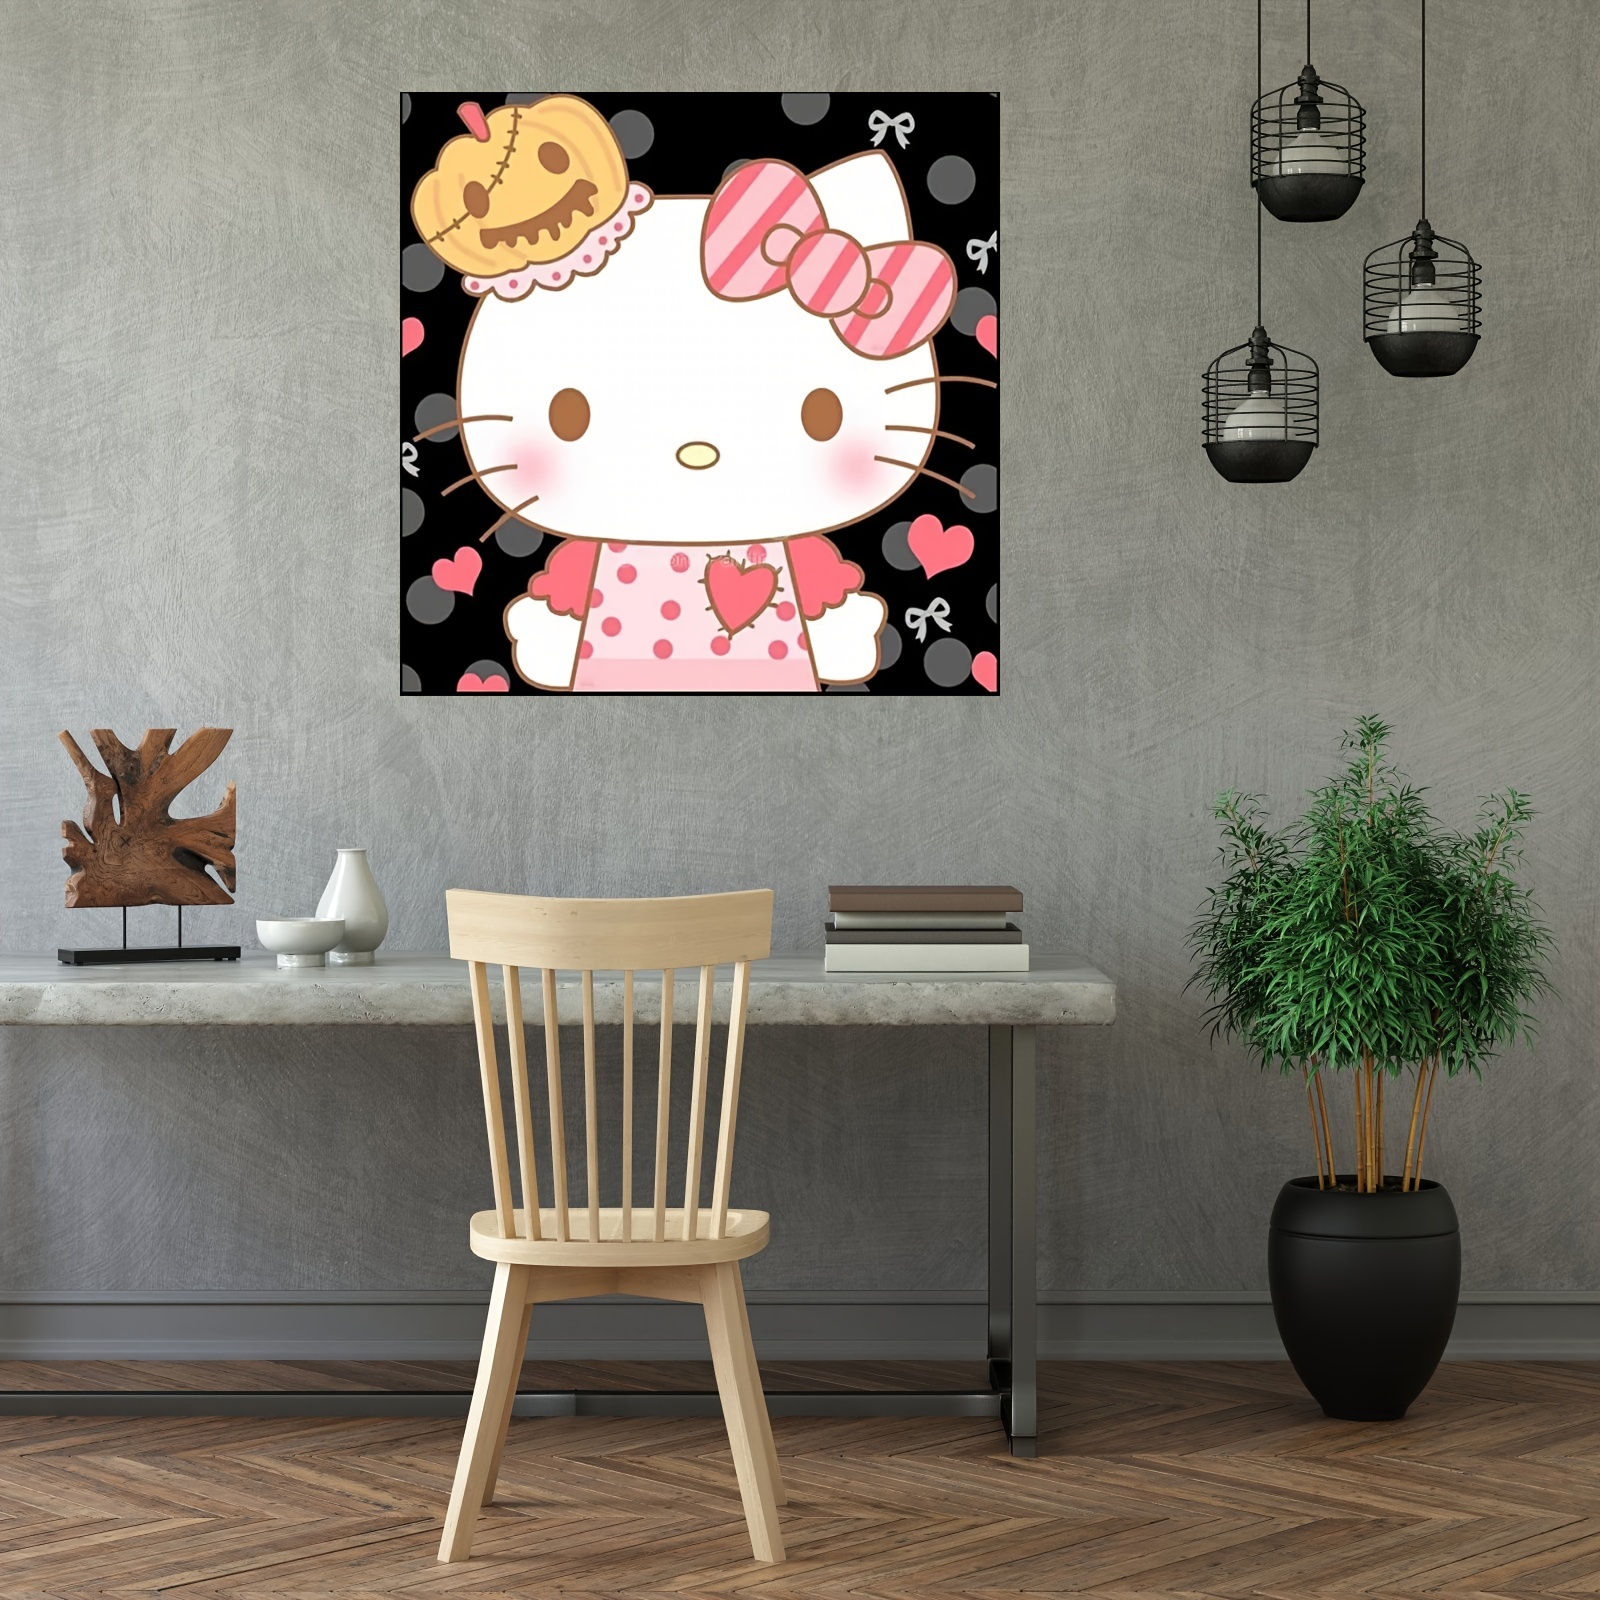 Hello Kitty Poster Take Pictures Poster Wall Art Sticky Poster